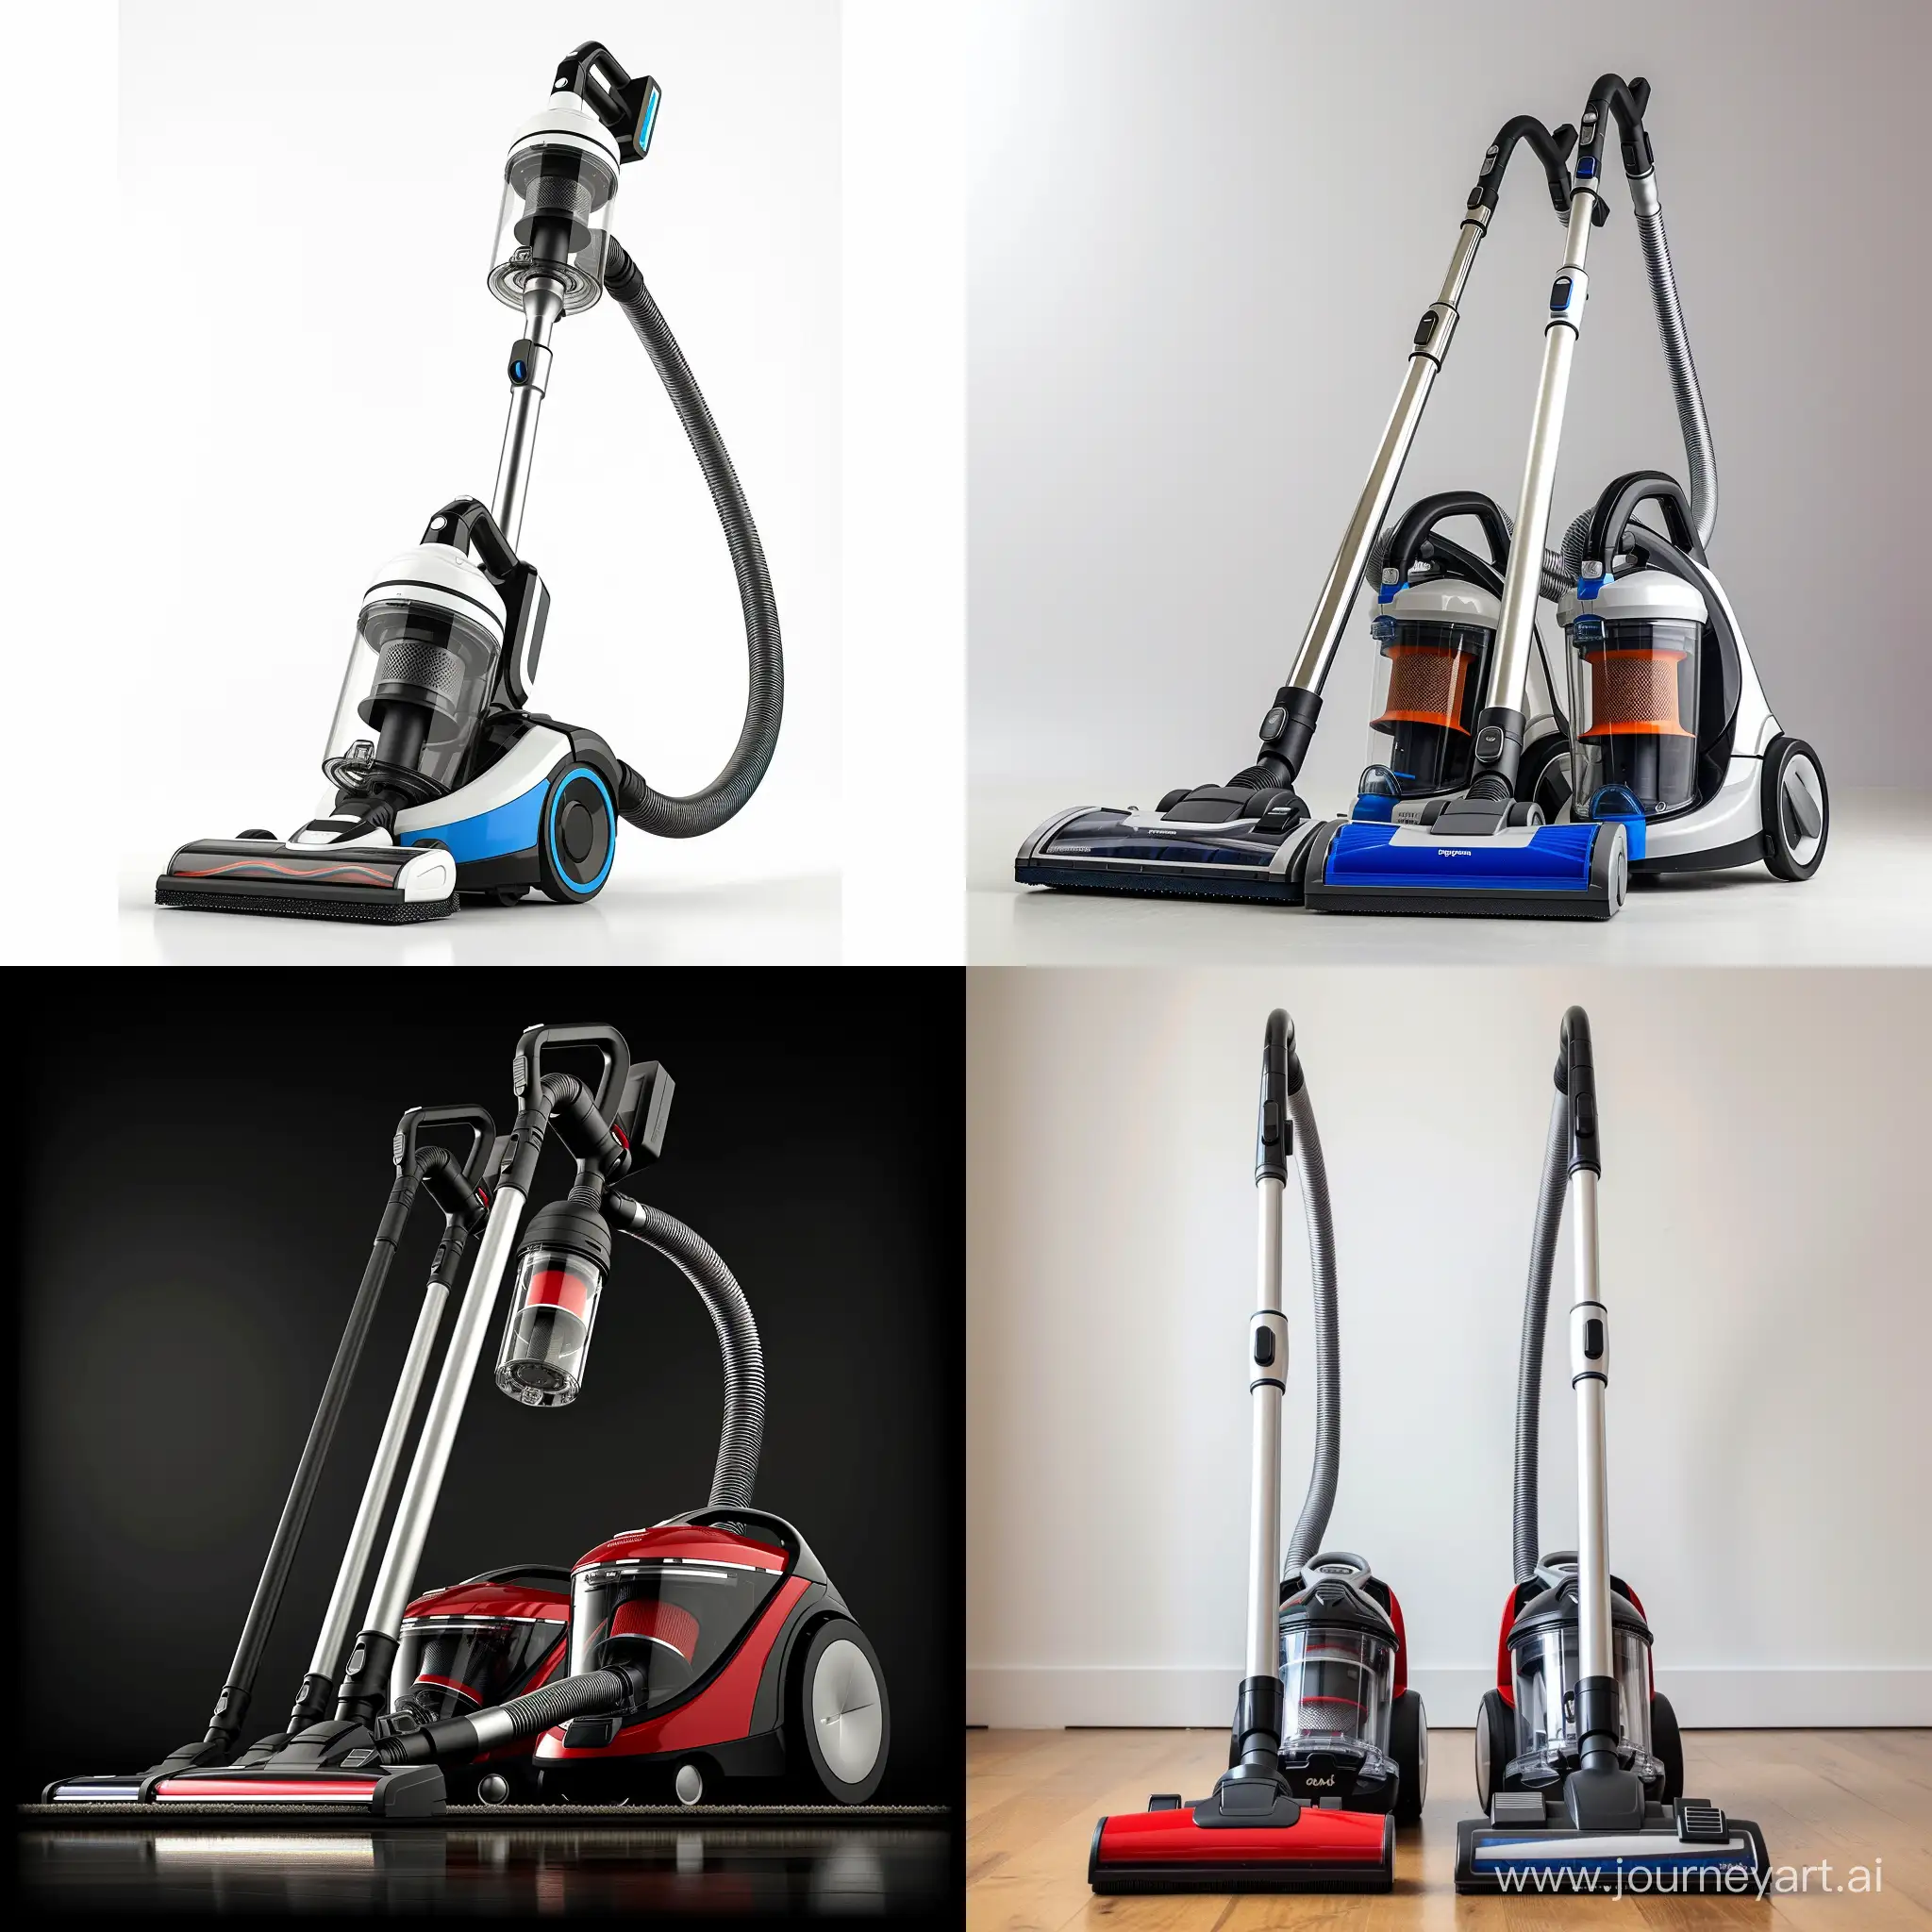 Upright Vacuum Cleaners,Canister Vacuums